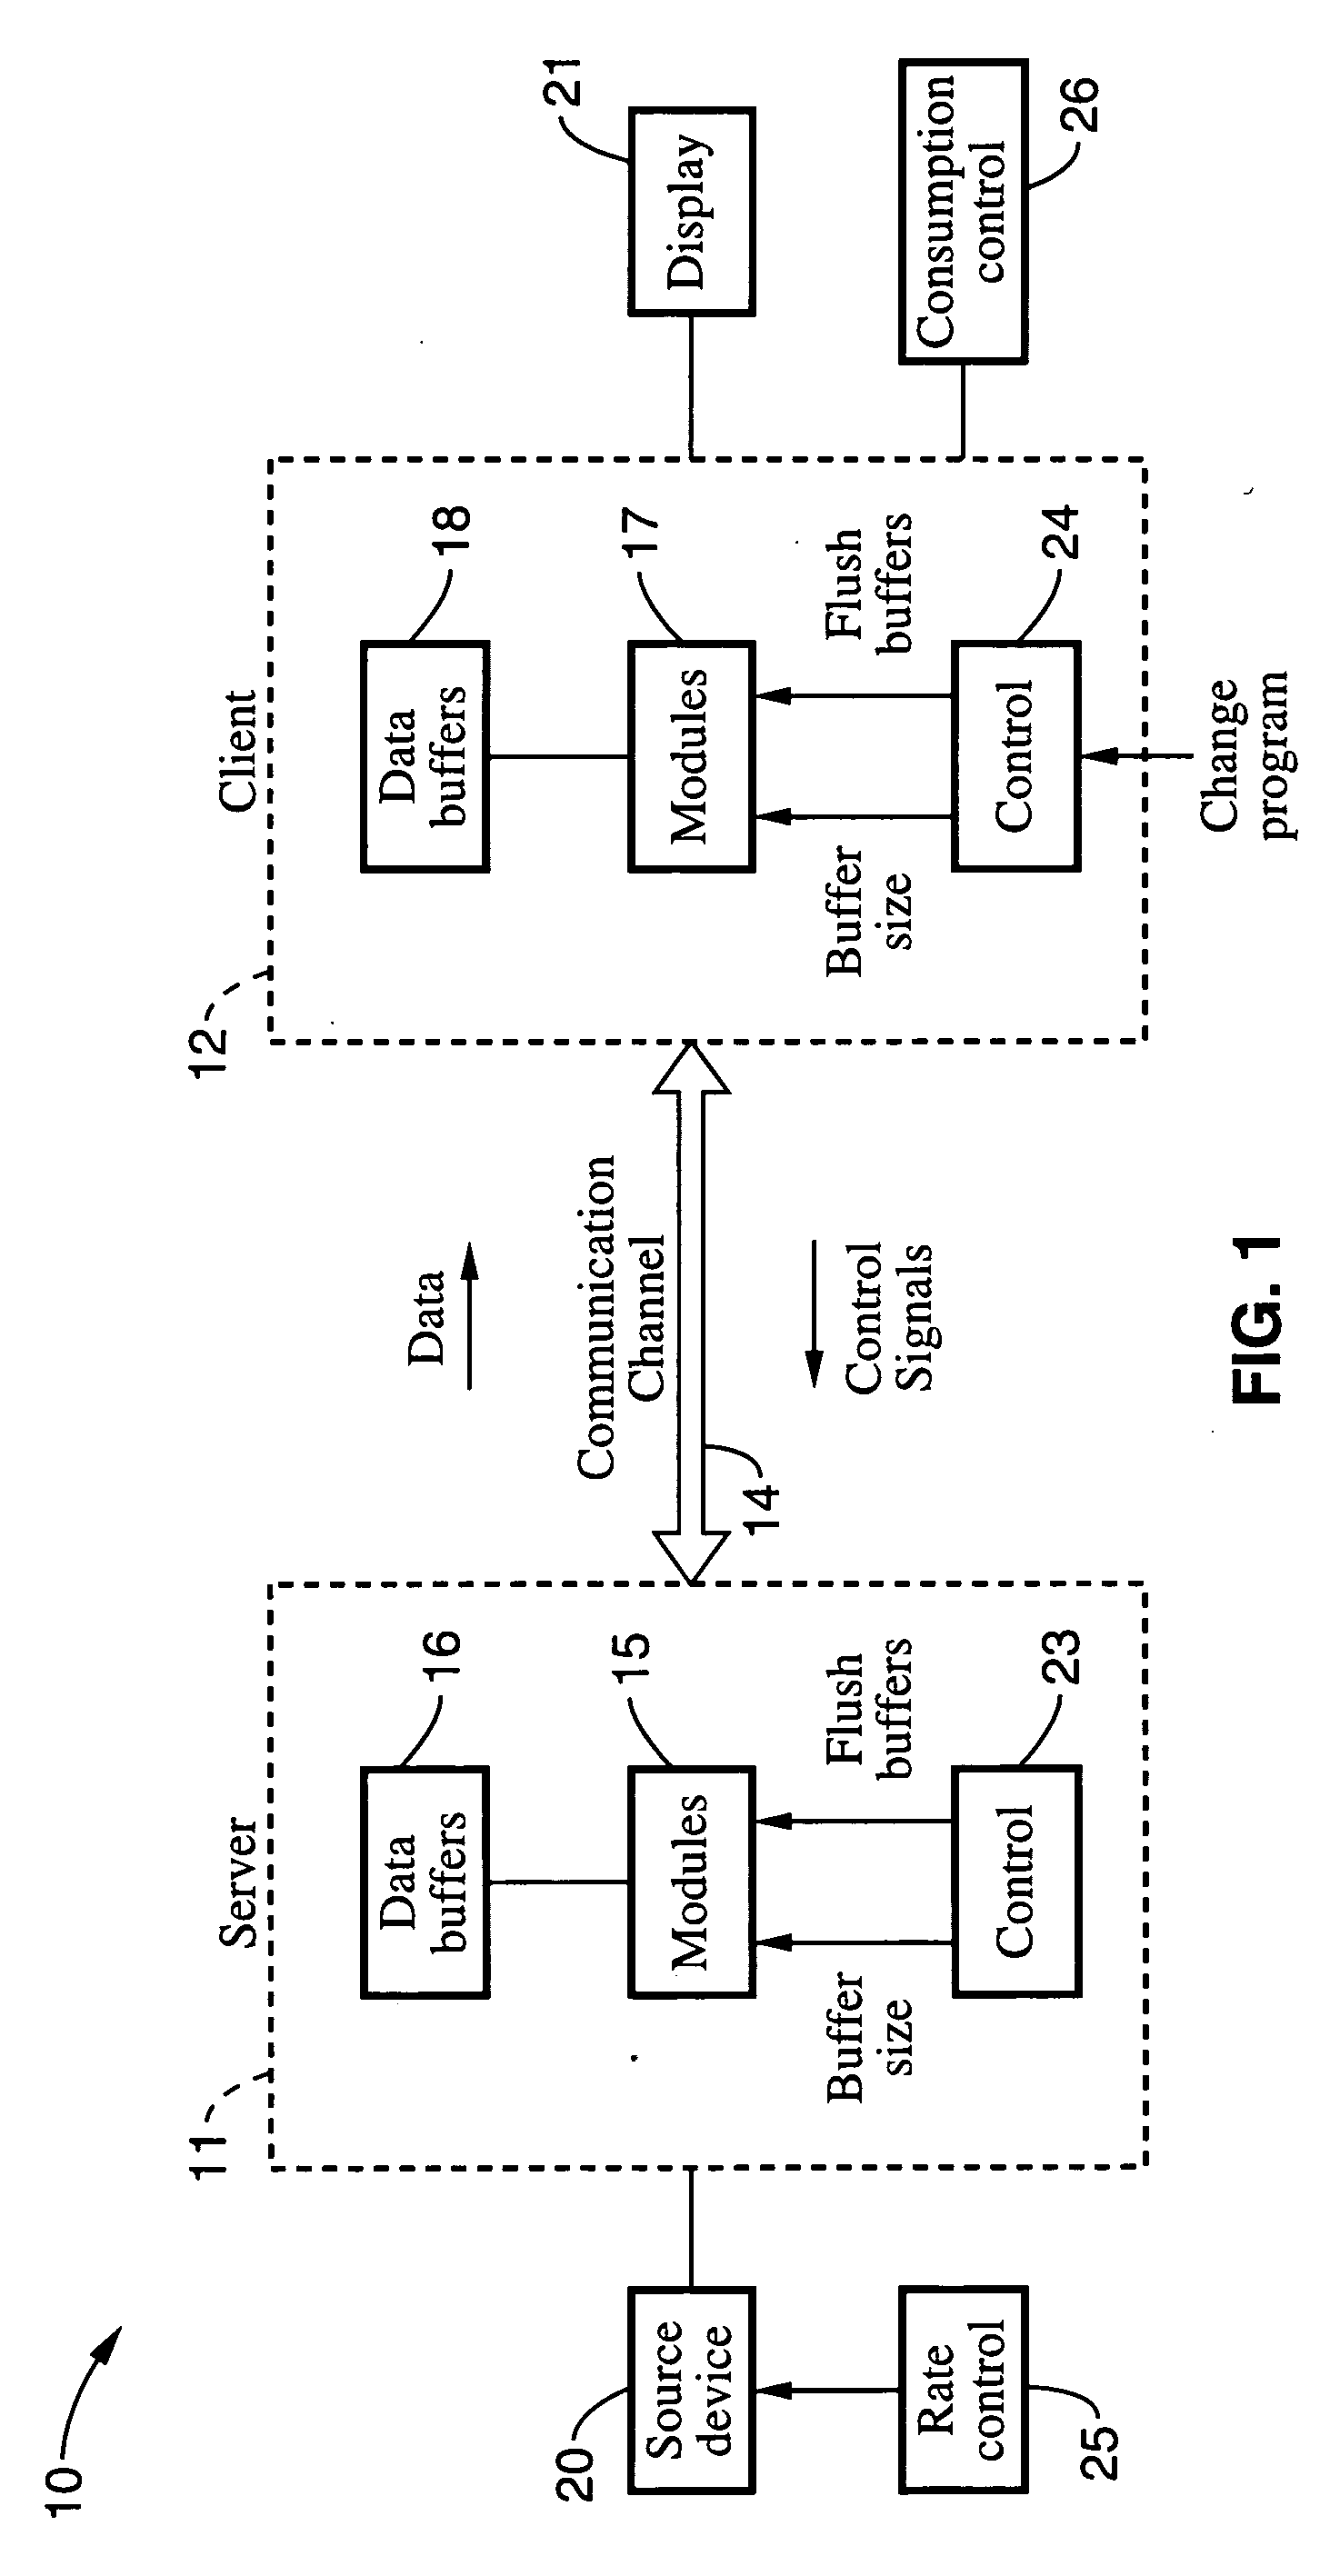 Methods and apparatus for decreasing streaming latencies for IPTV